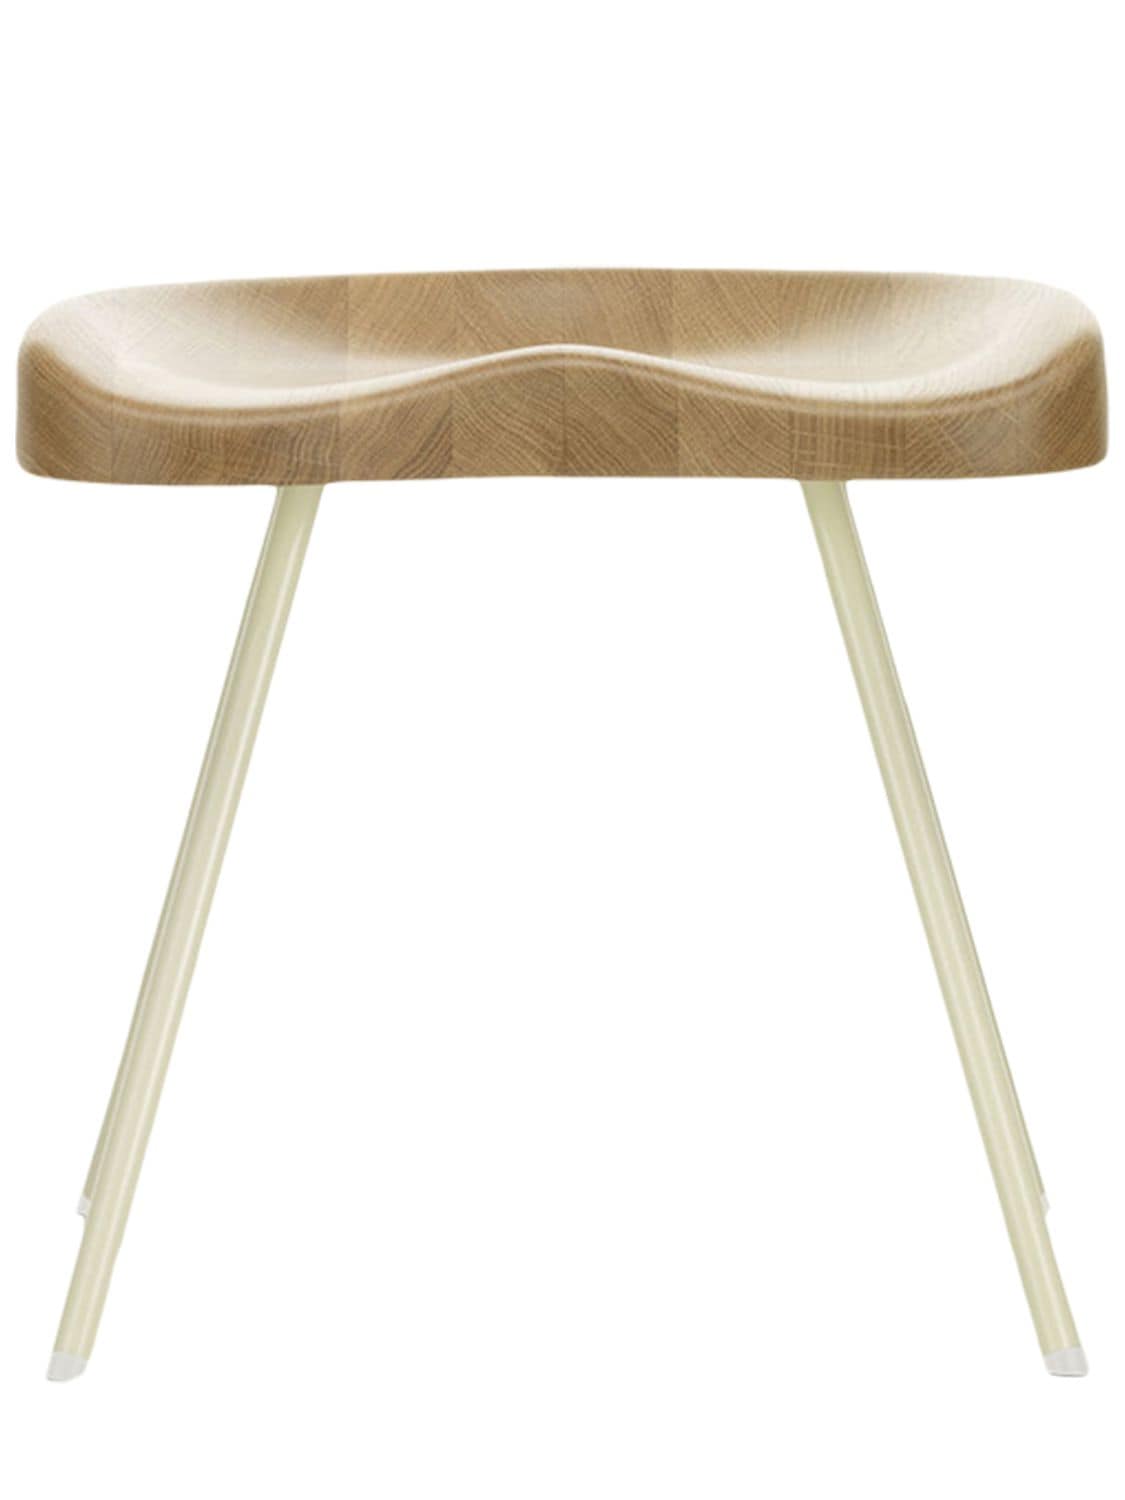 Vitra Tabouret 307 Stool In Brown